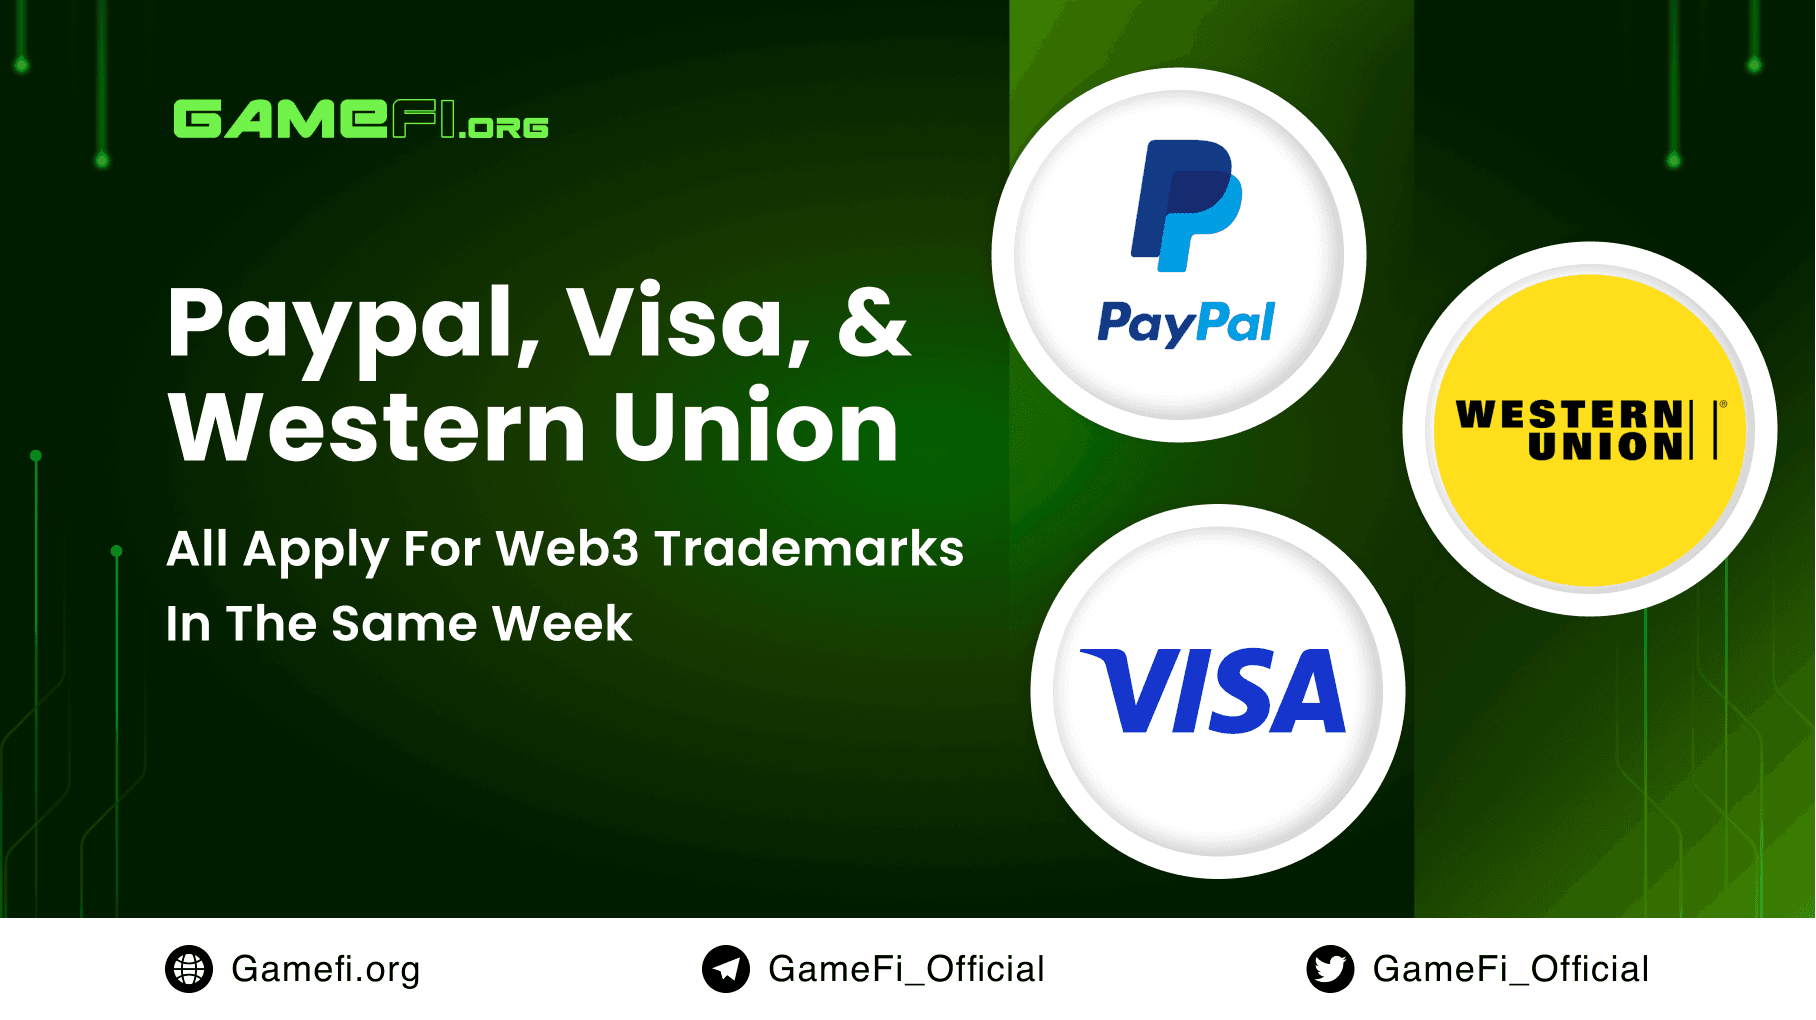 Paypal, Visa, And Western Union All Apply for Web3 Trademarks in the Same Week